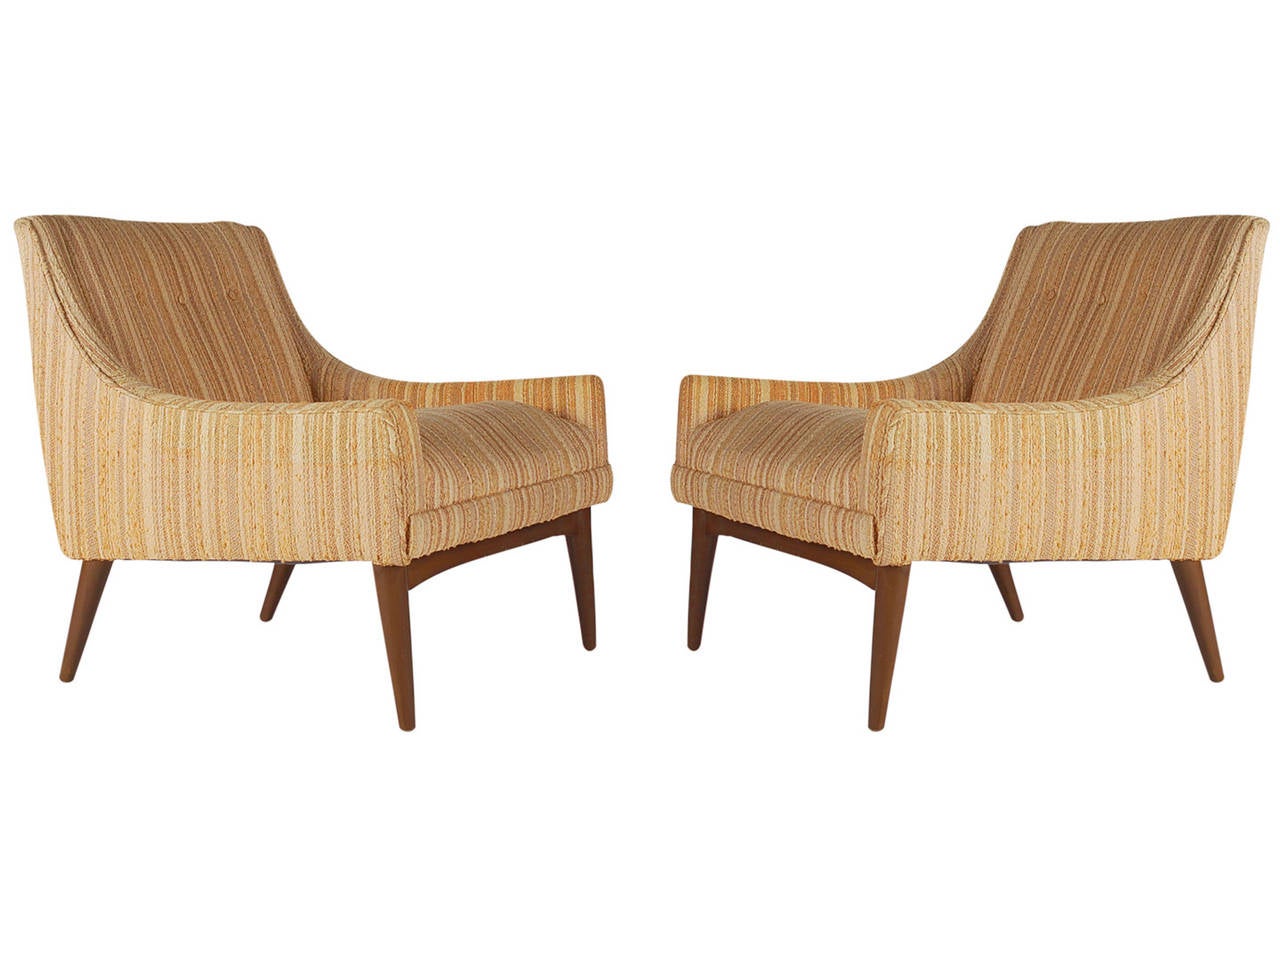 A lovely sculptural pair of lounge chairs in the style of Milo Baughman. The feature the original upholstery and tapered walnut legs. Upholstery is fair and needs recovering. 

In the style of: Edward Wormley, Paul McCobb, Thayer Coggin, Dunbar